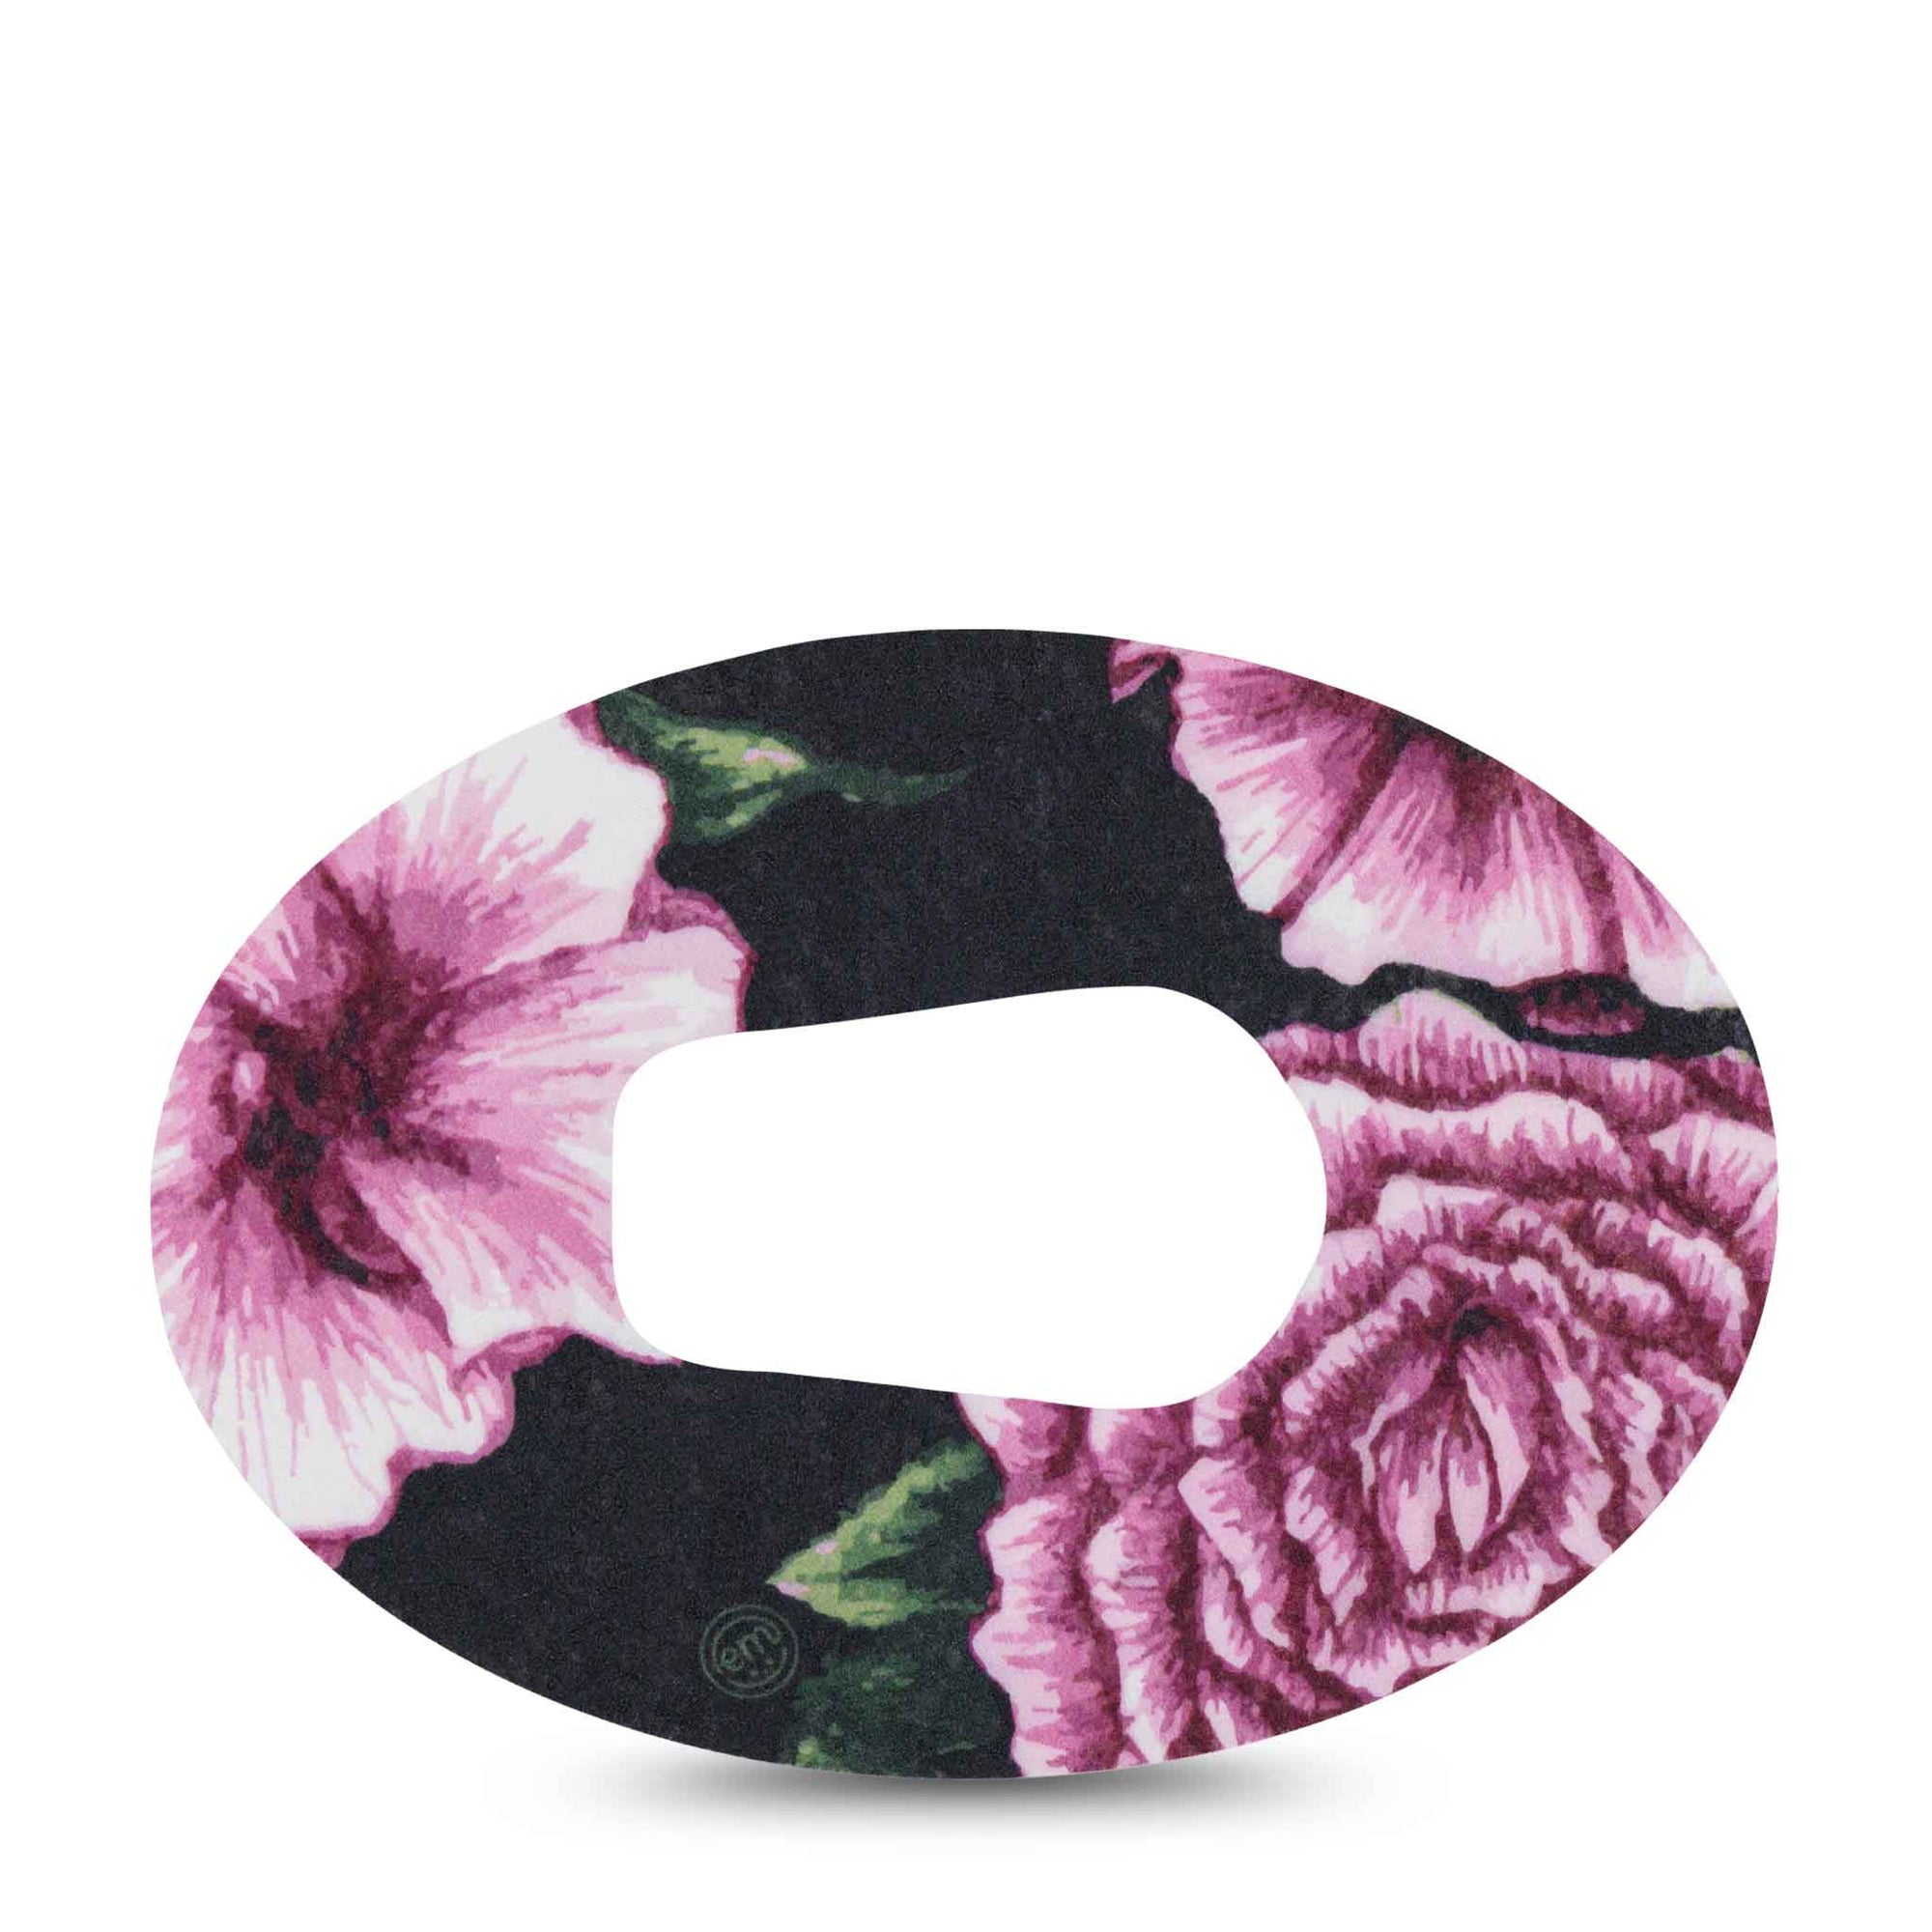 ExpressionMed Intricate Flower Dexcom G6 Wide Tape